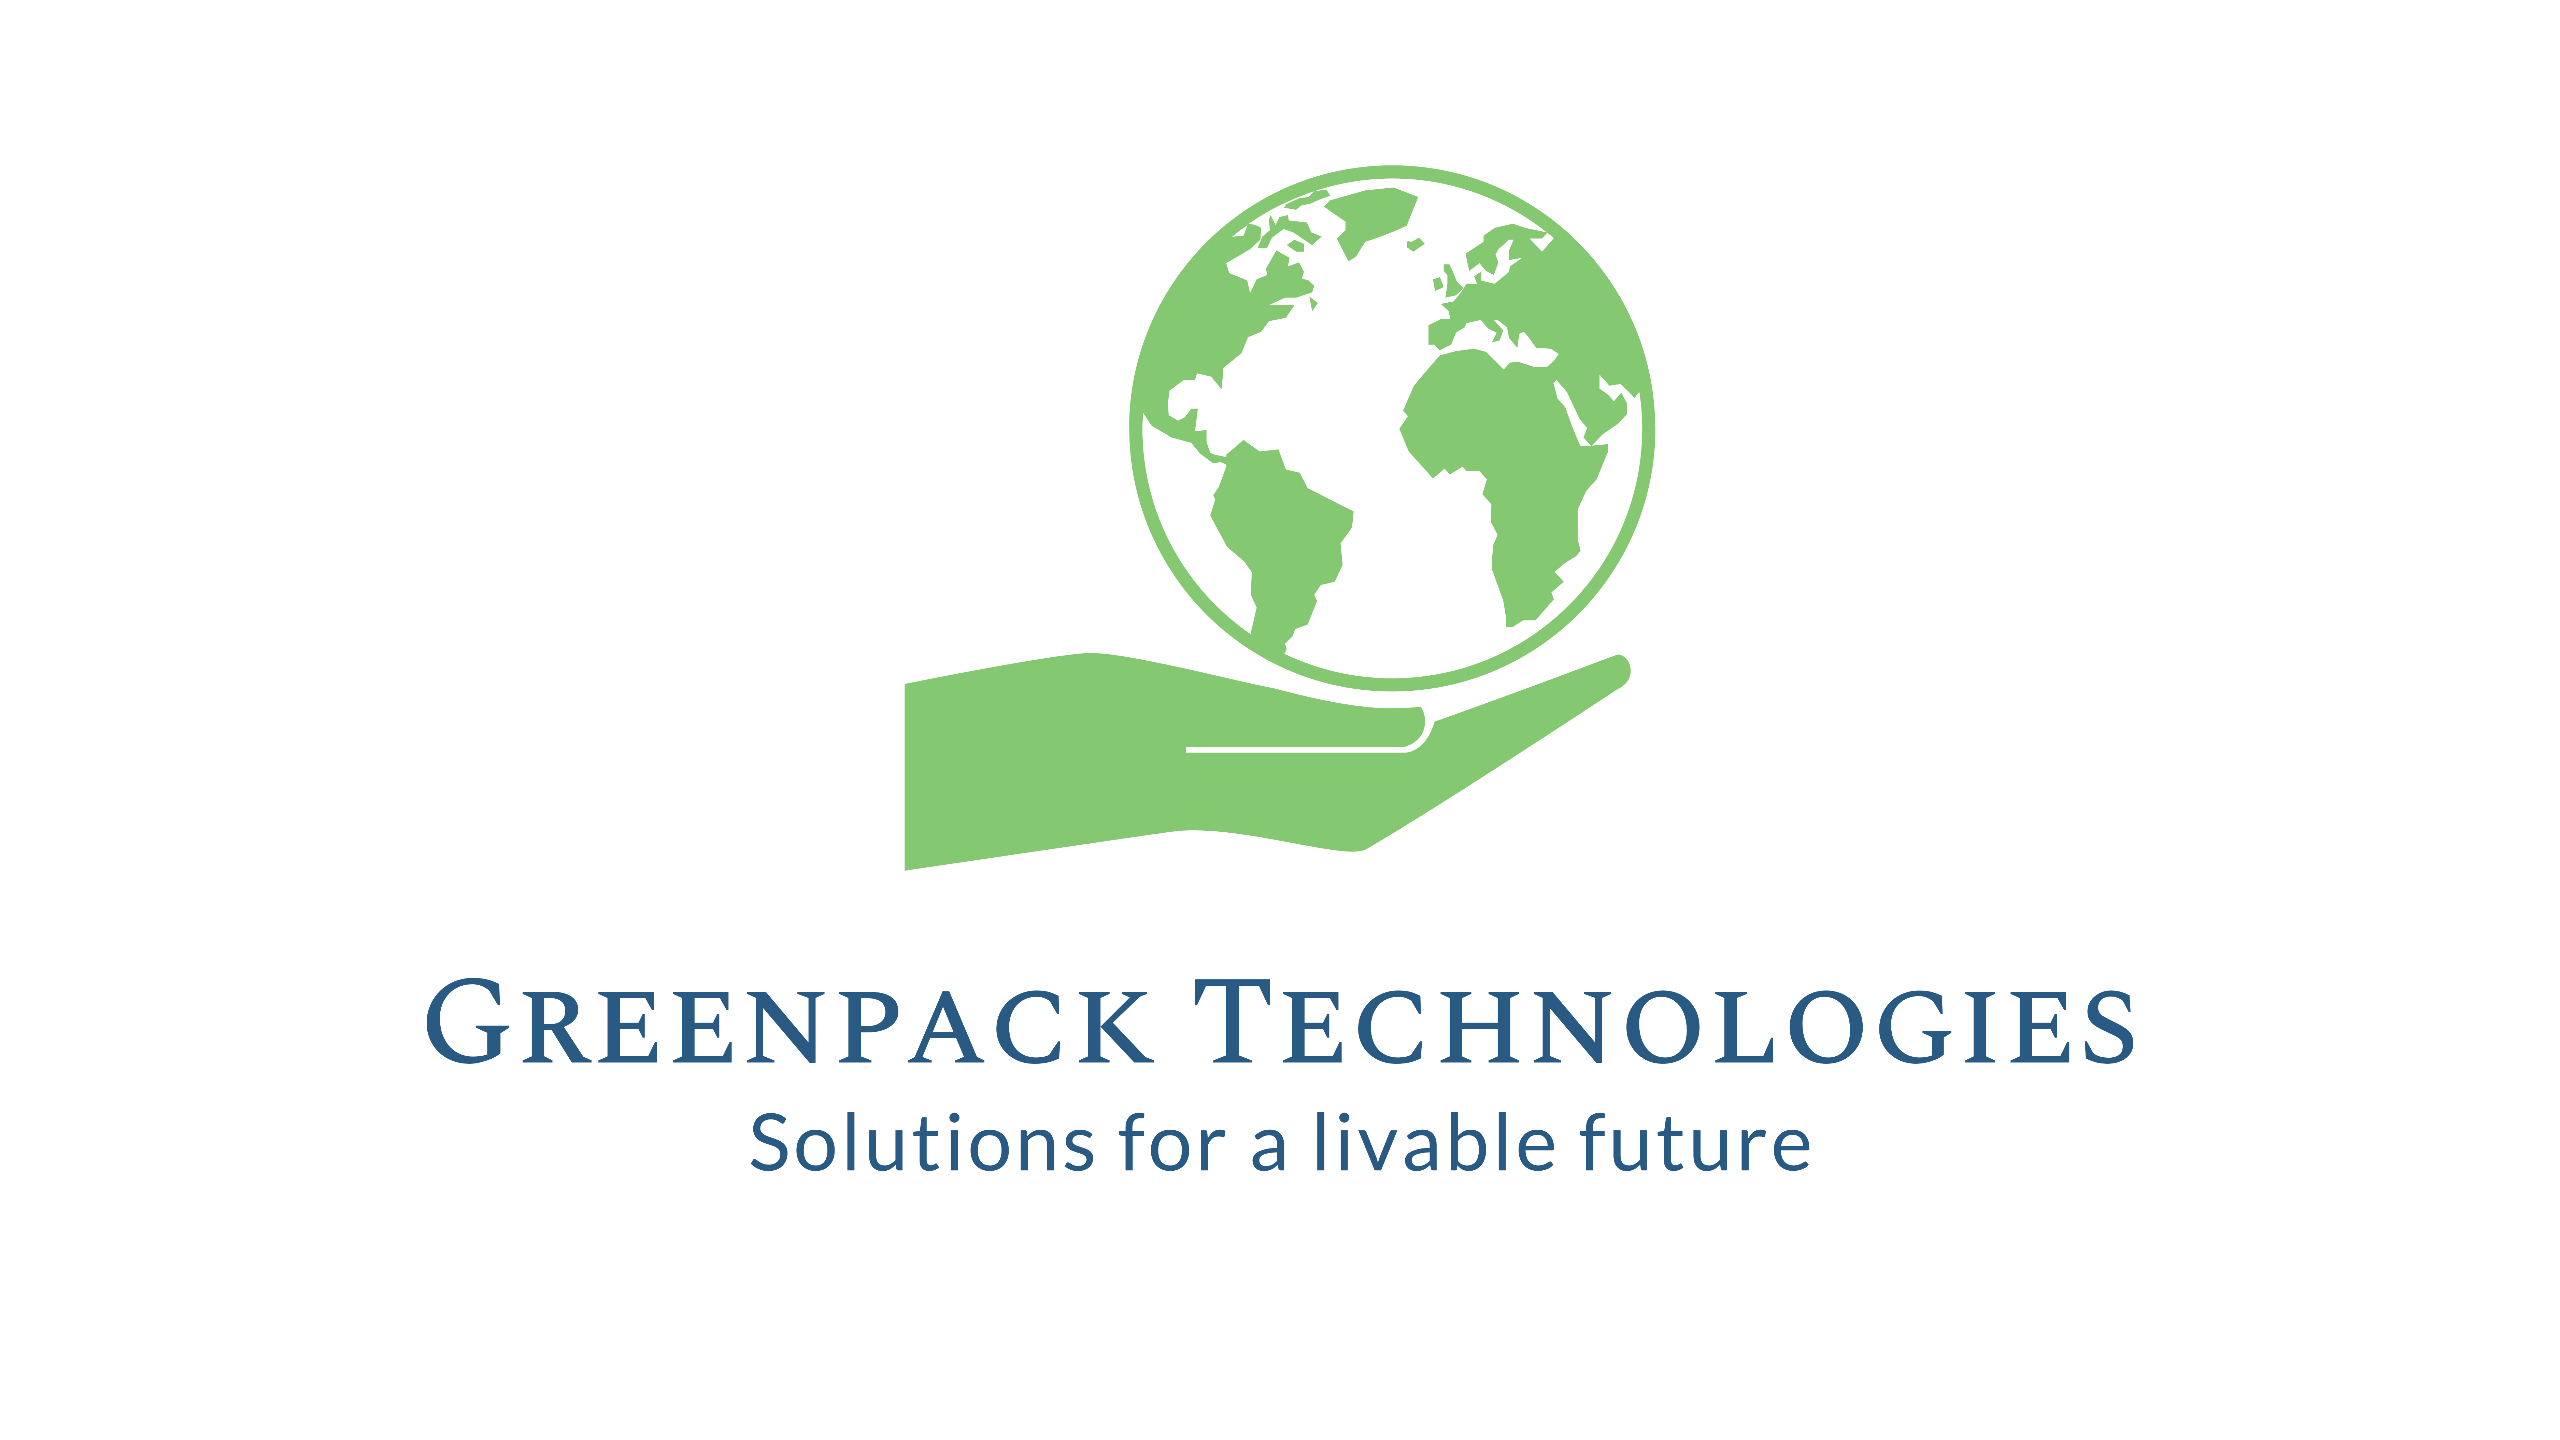 This is a photo of the Greenpack Technologies logo.